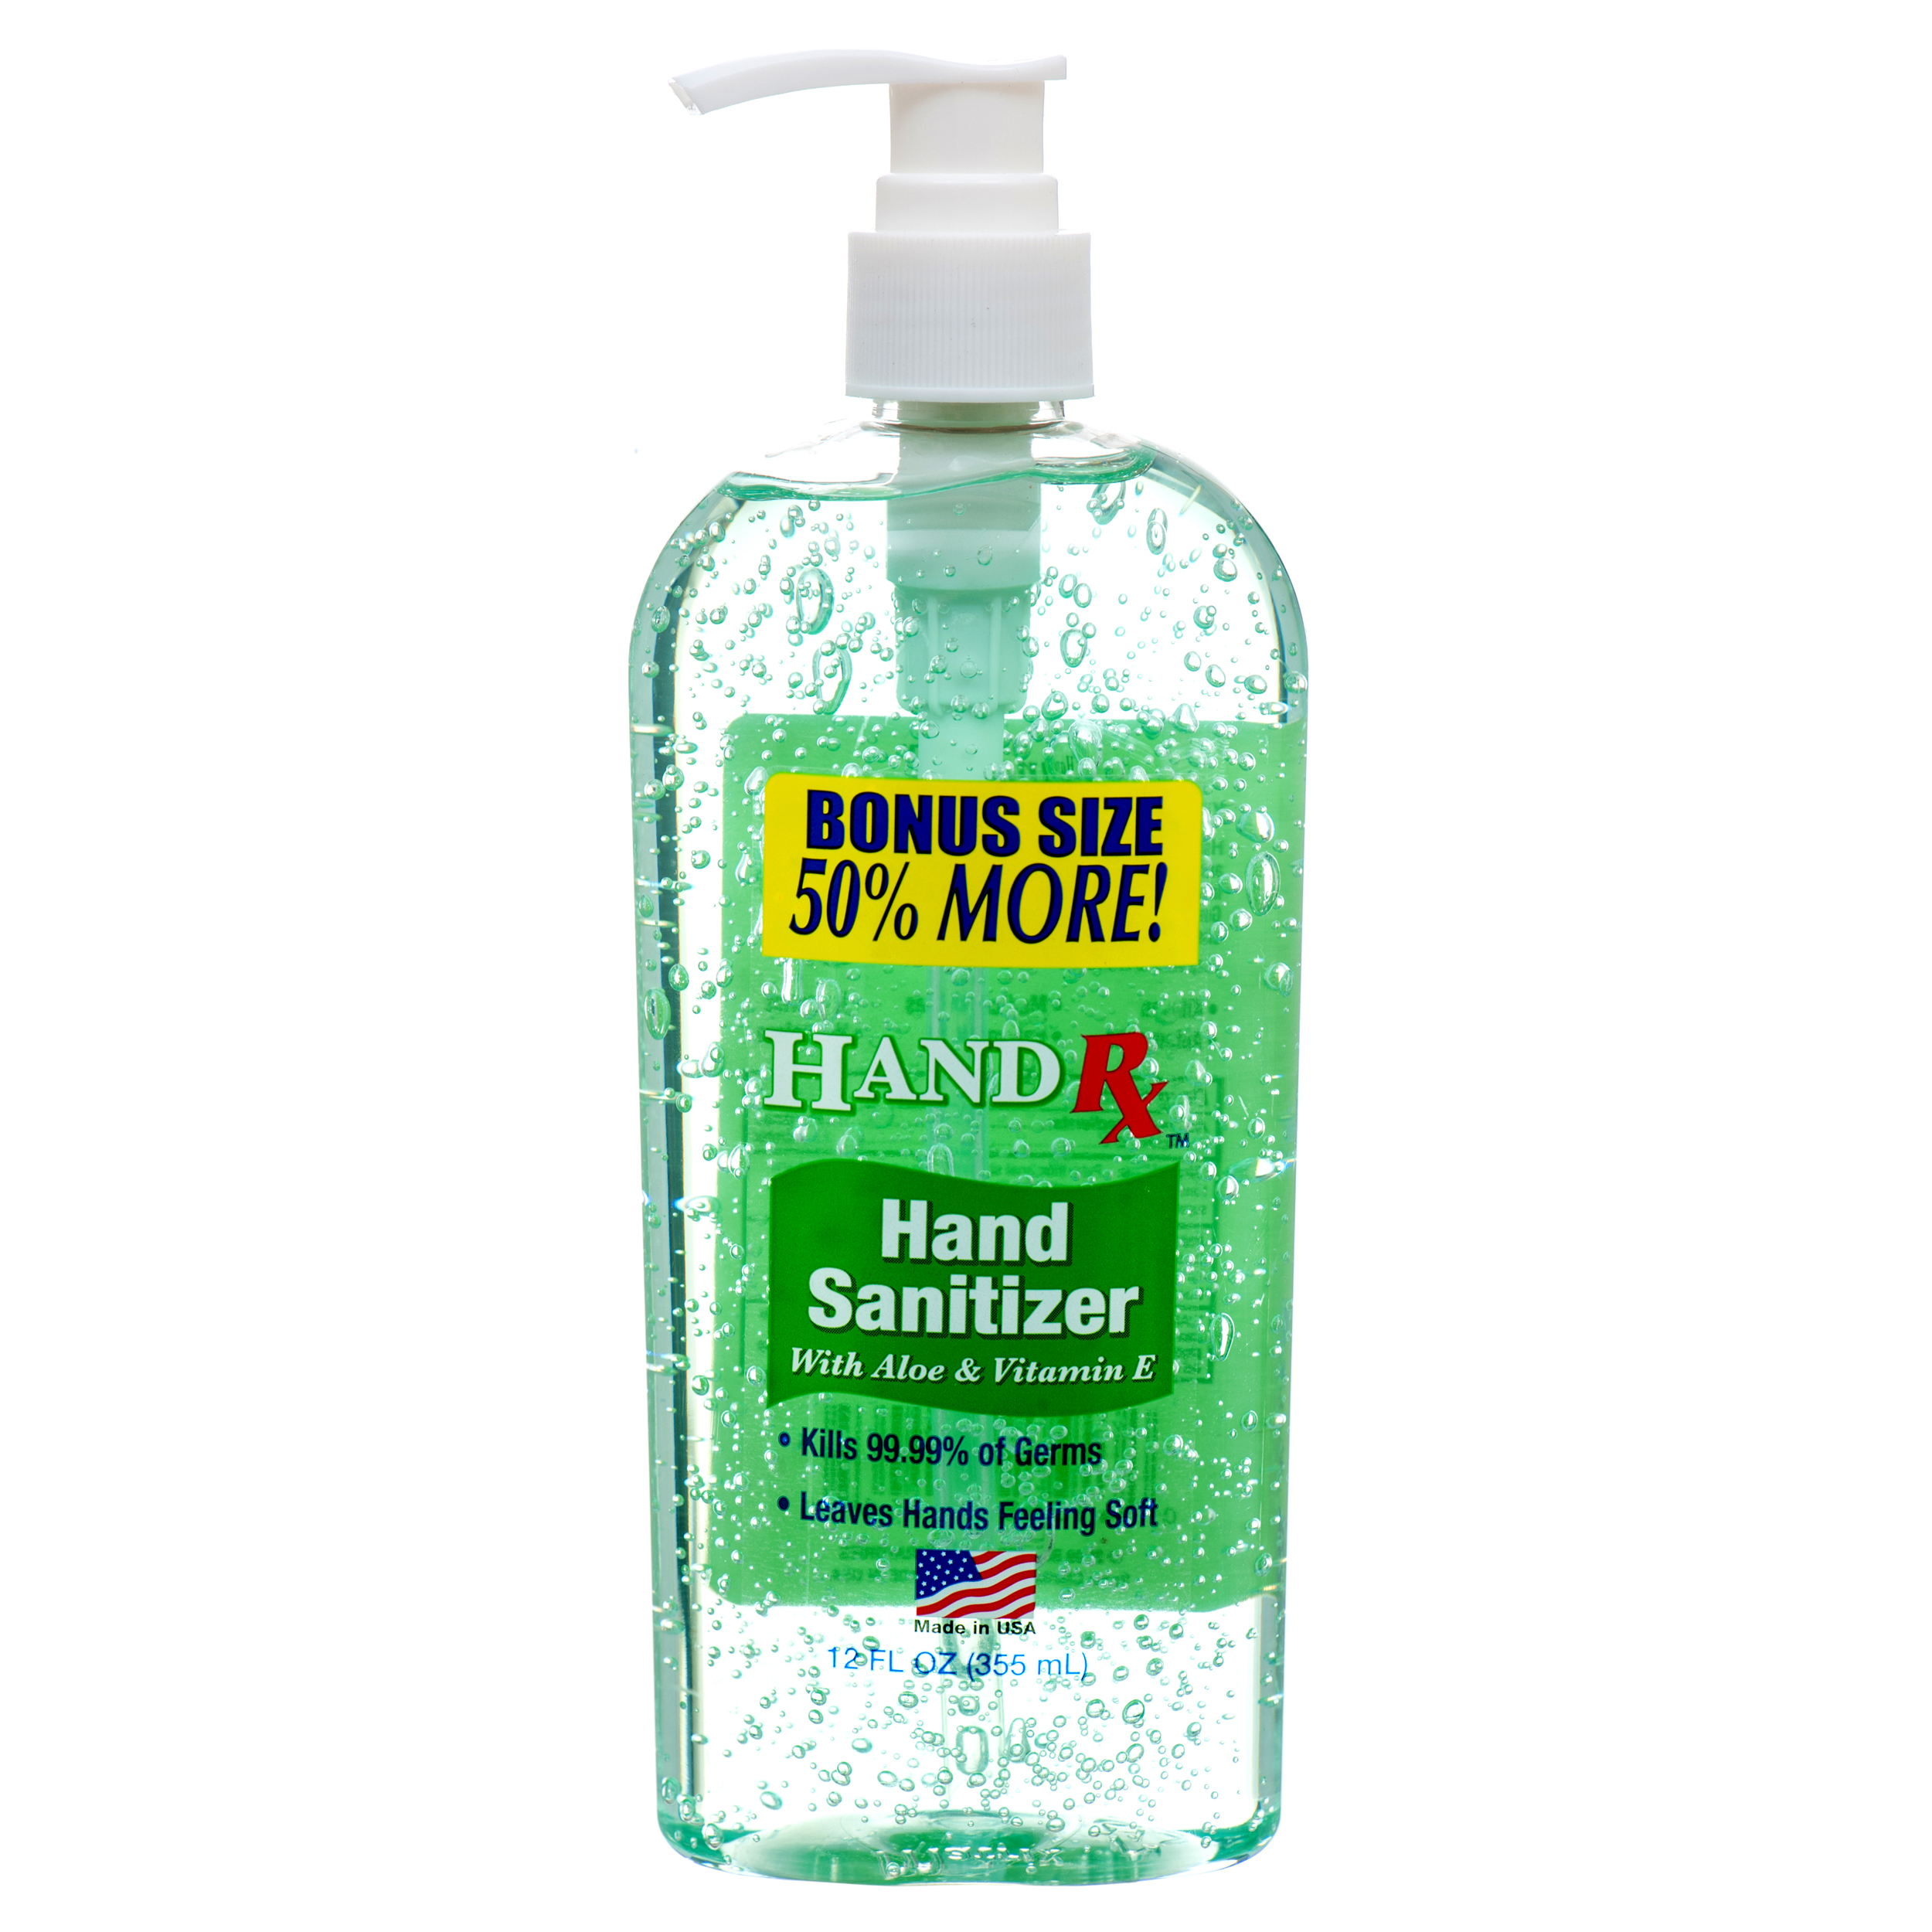 12 Ounce Hand Sanitizer - Made in USA 62% Alcohol - We are simply passing t...